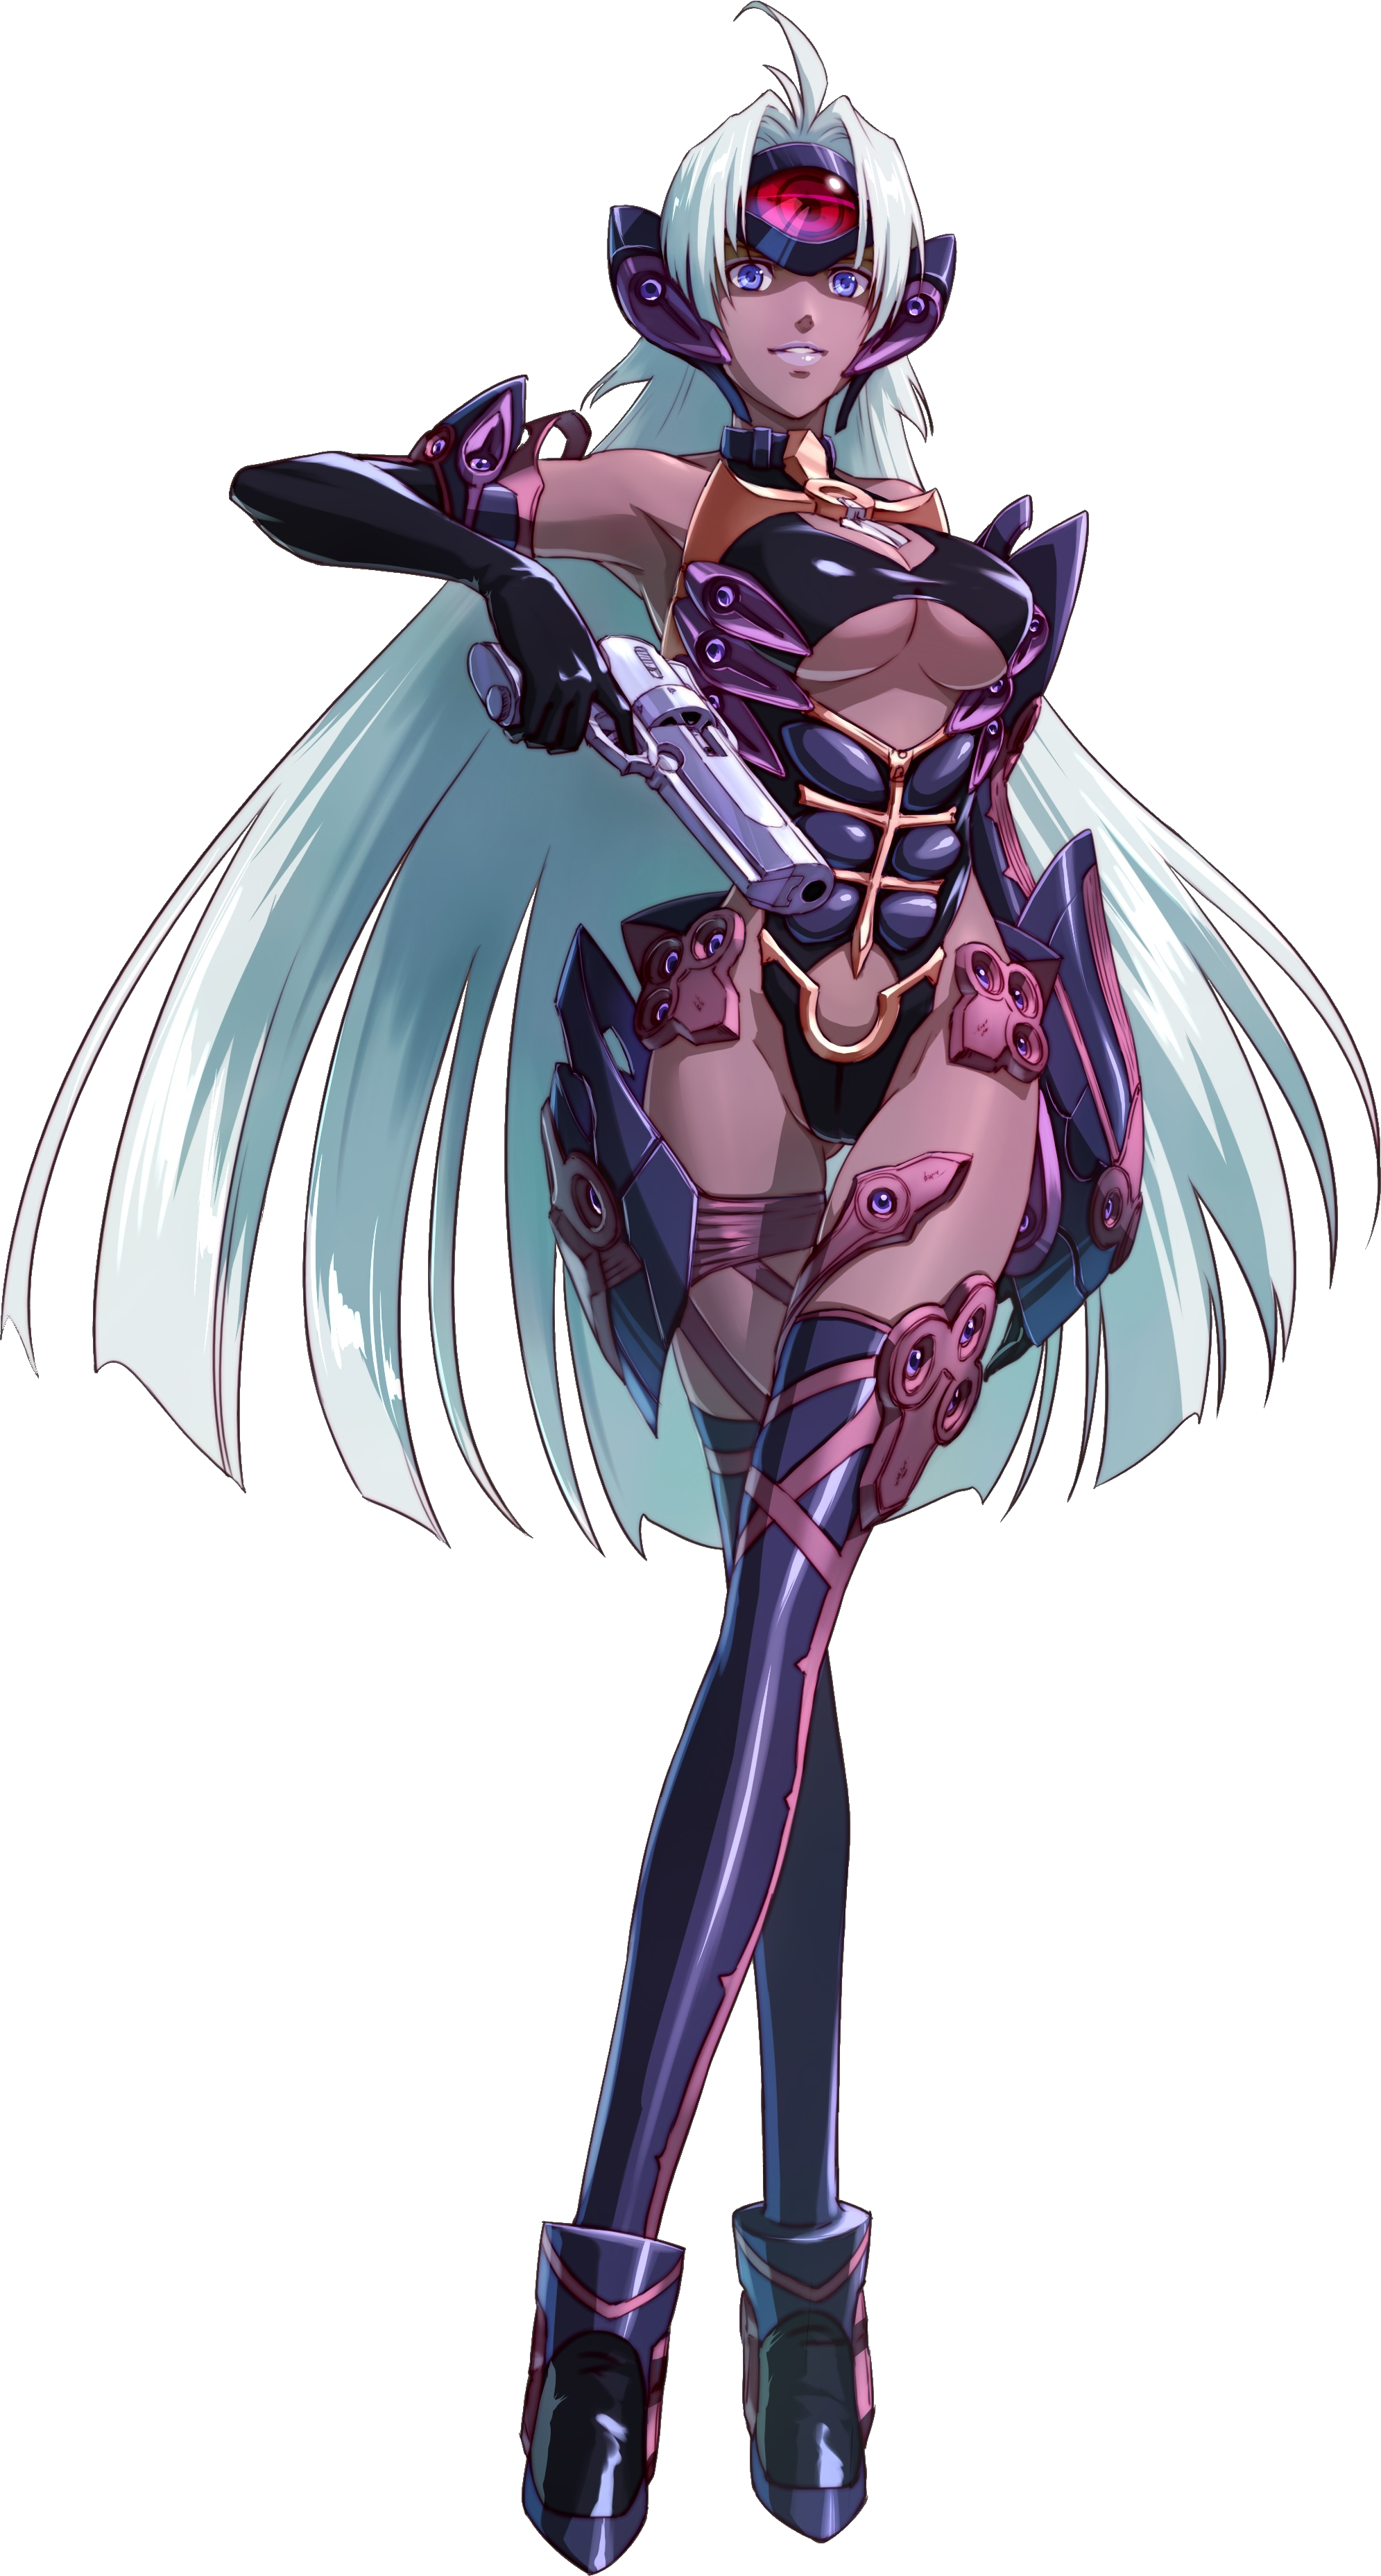 2343817-t_elos_project_x_zone.png